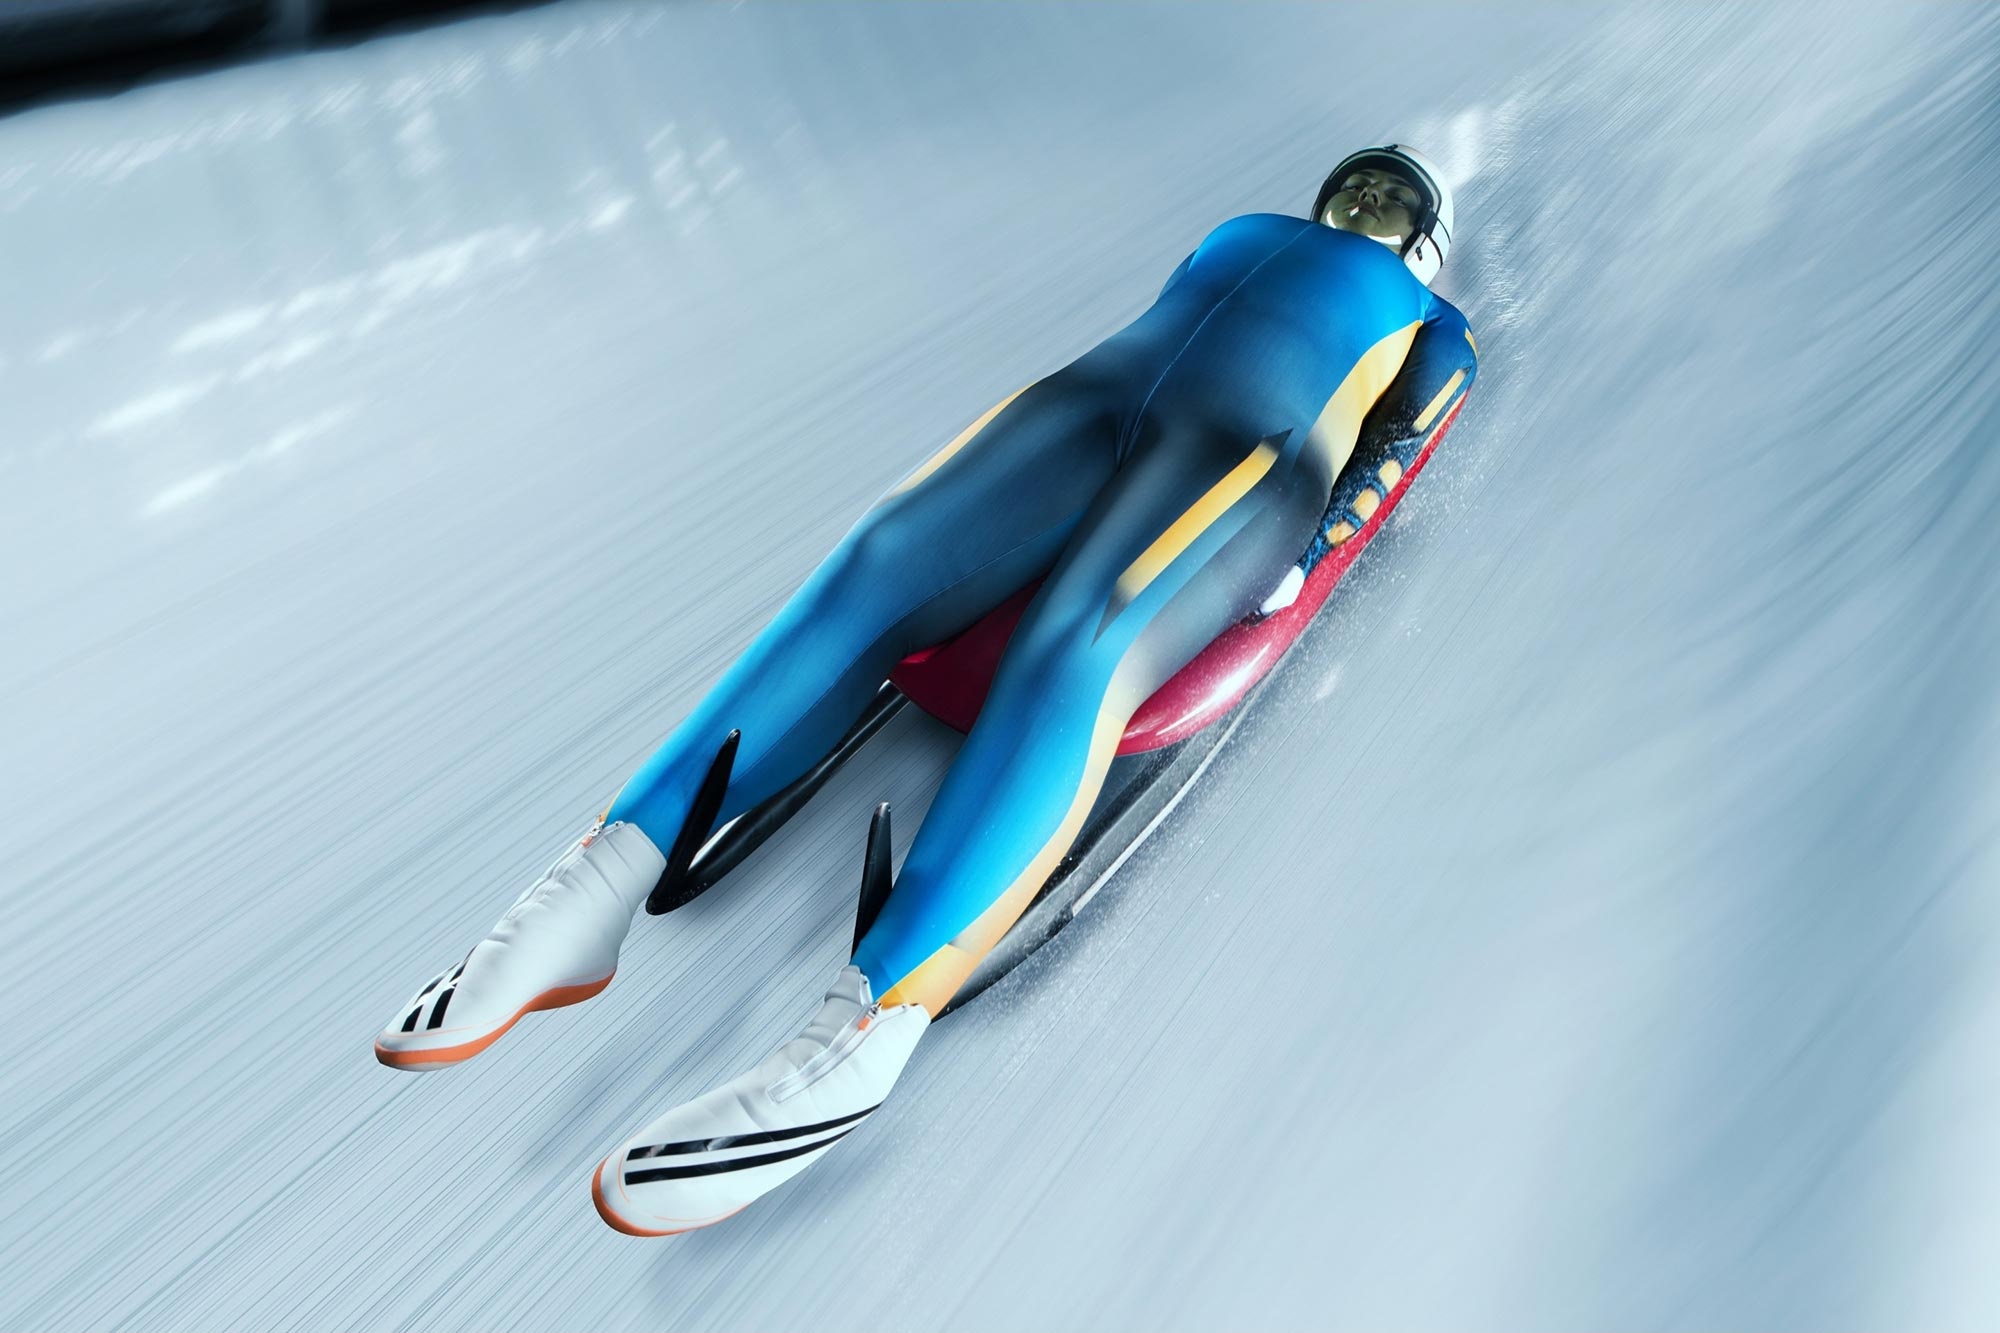 Luge: The high-speed sliding down an iced track, An extreme competitive winter sports discipline. 2000x1340 HD Wallpaper.